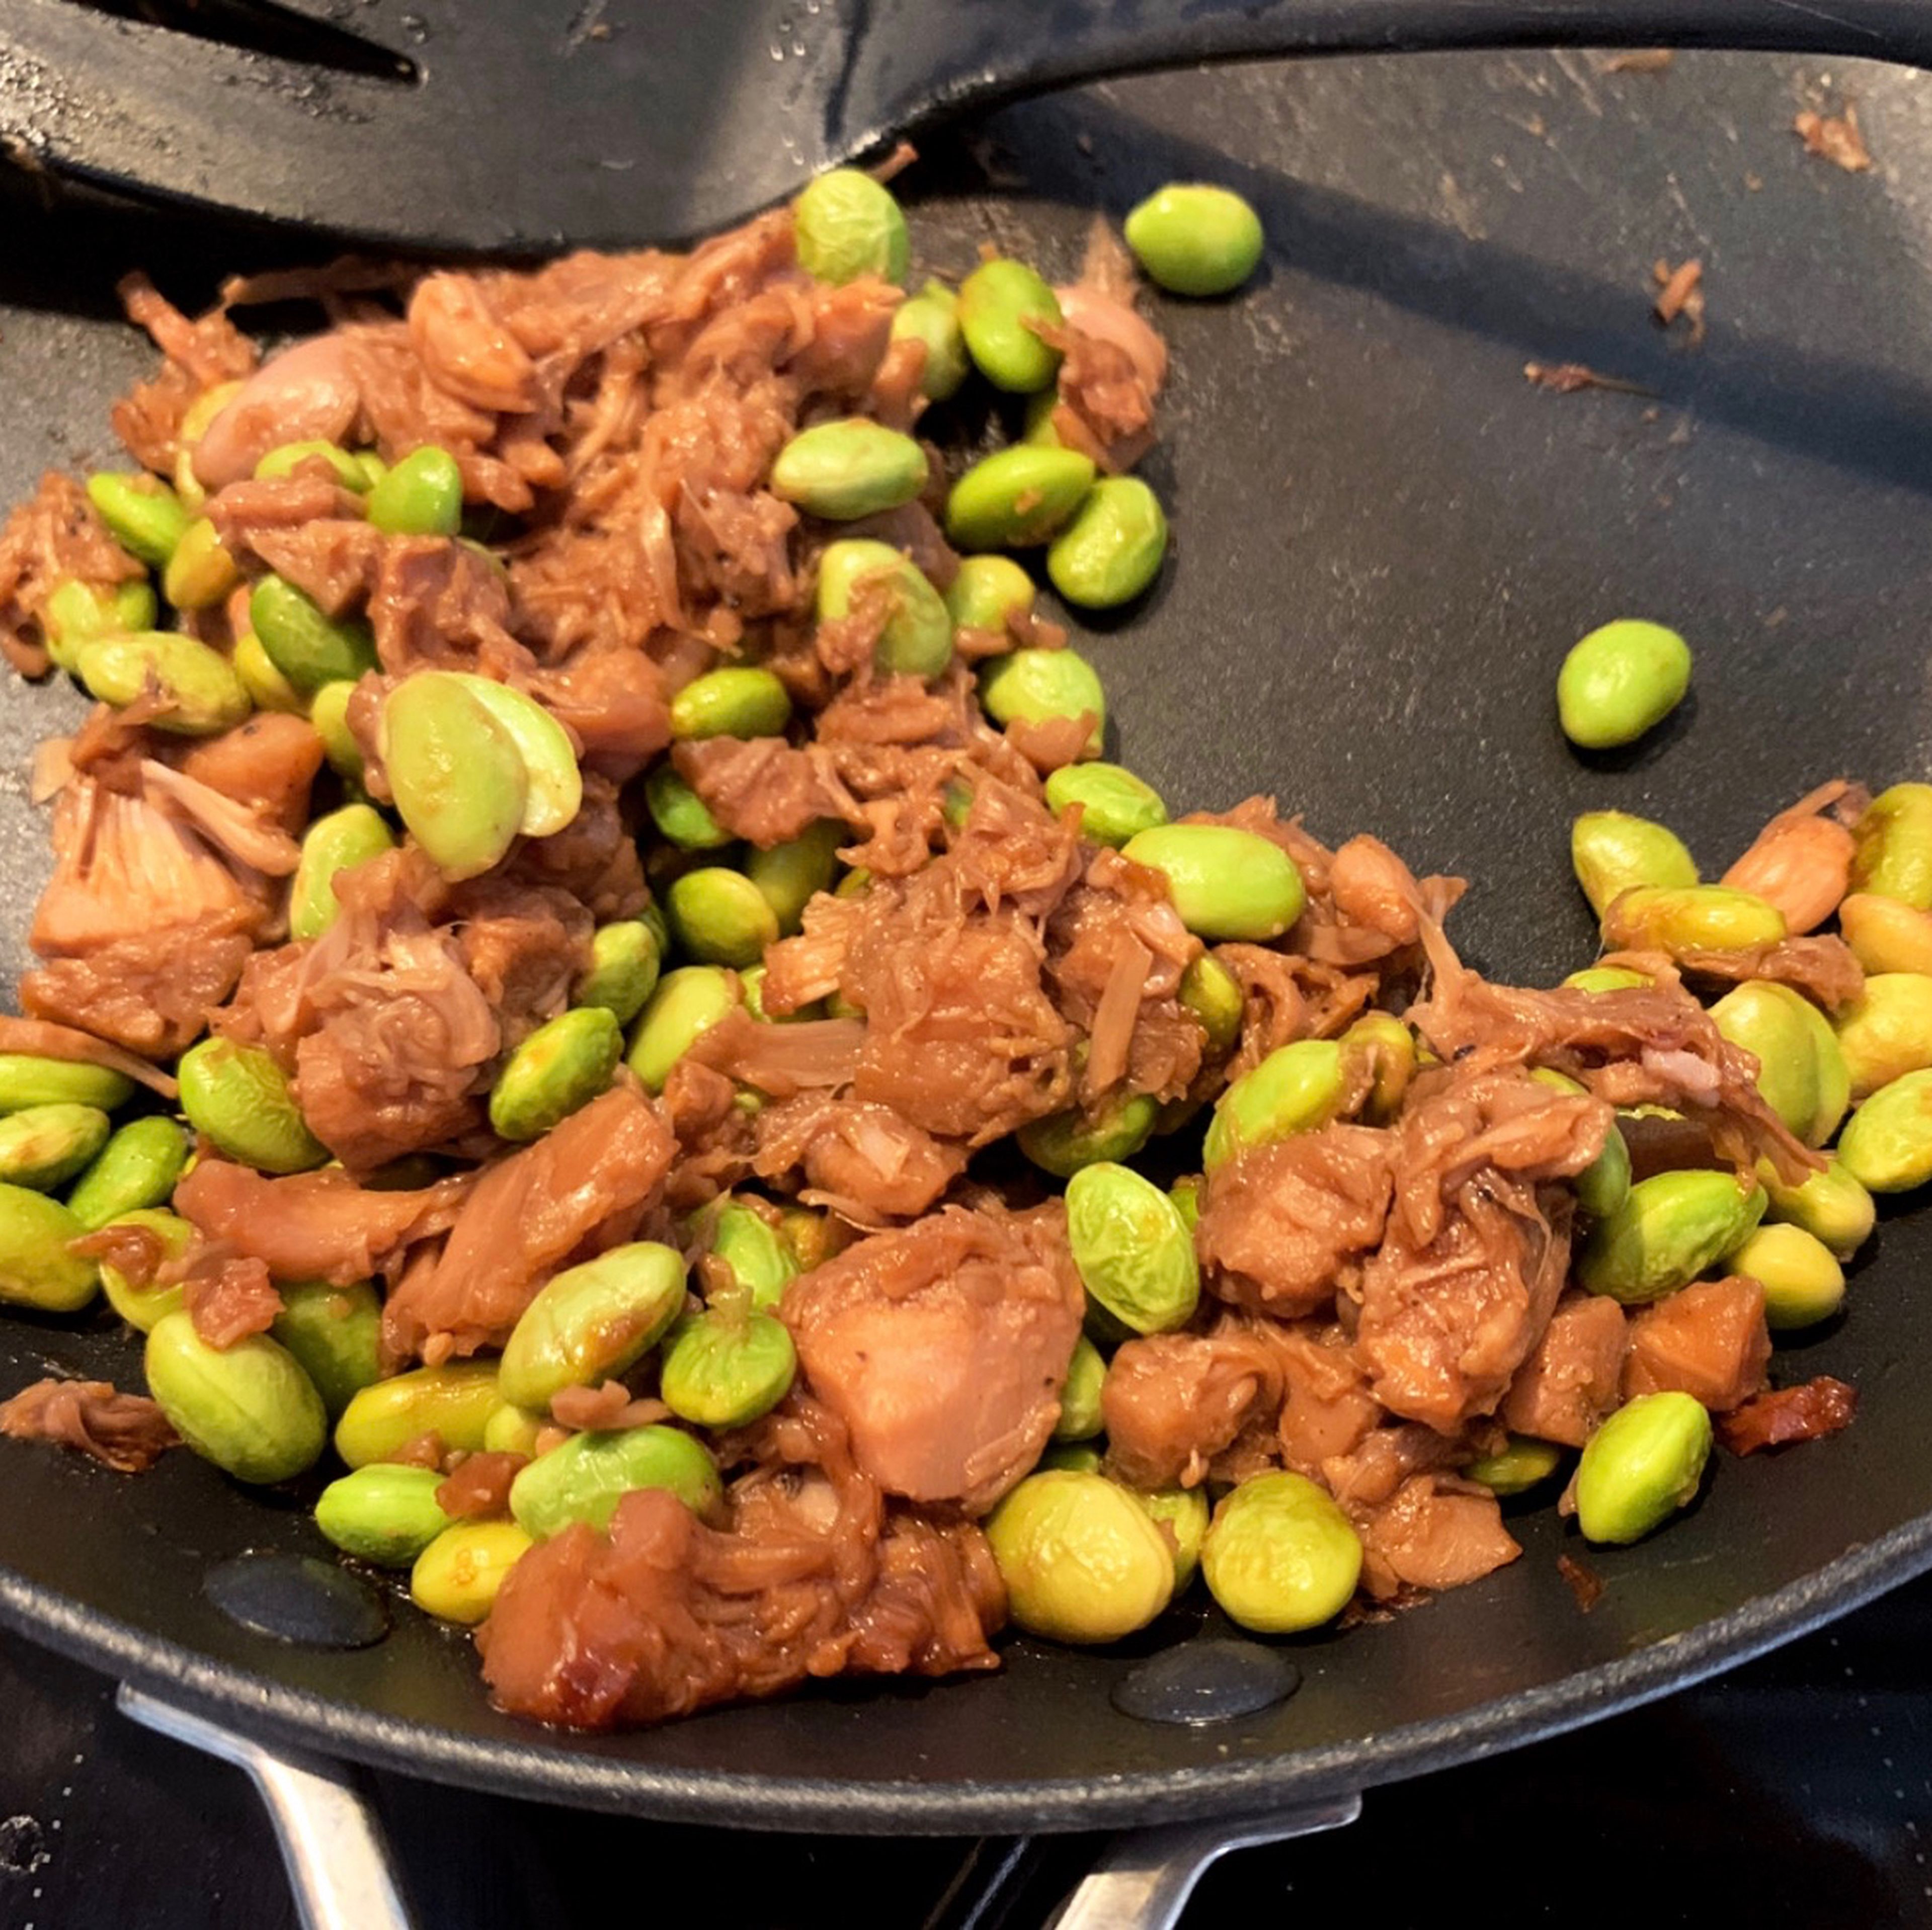 Add edamame beans to the separate frying pan. Drain jackfruit then add it to the beans. Fry both ingredients together until they’re cooked. Add teriyaki sauce, season with salt and pepper and cook for next 2-4min